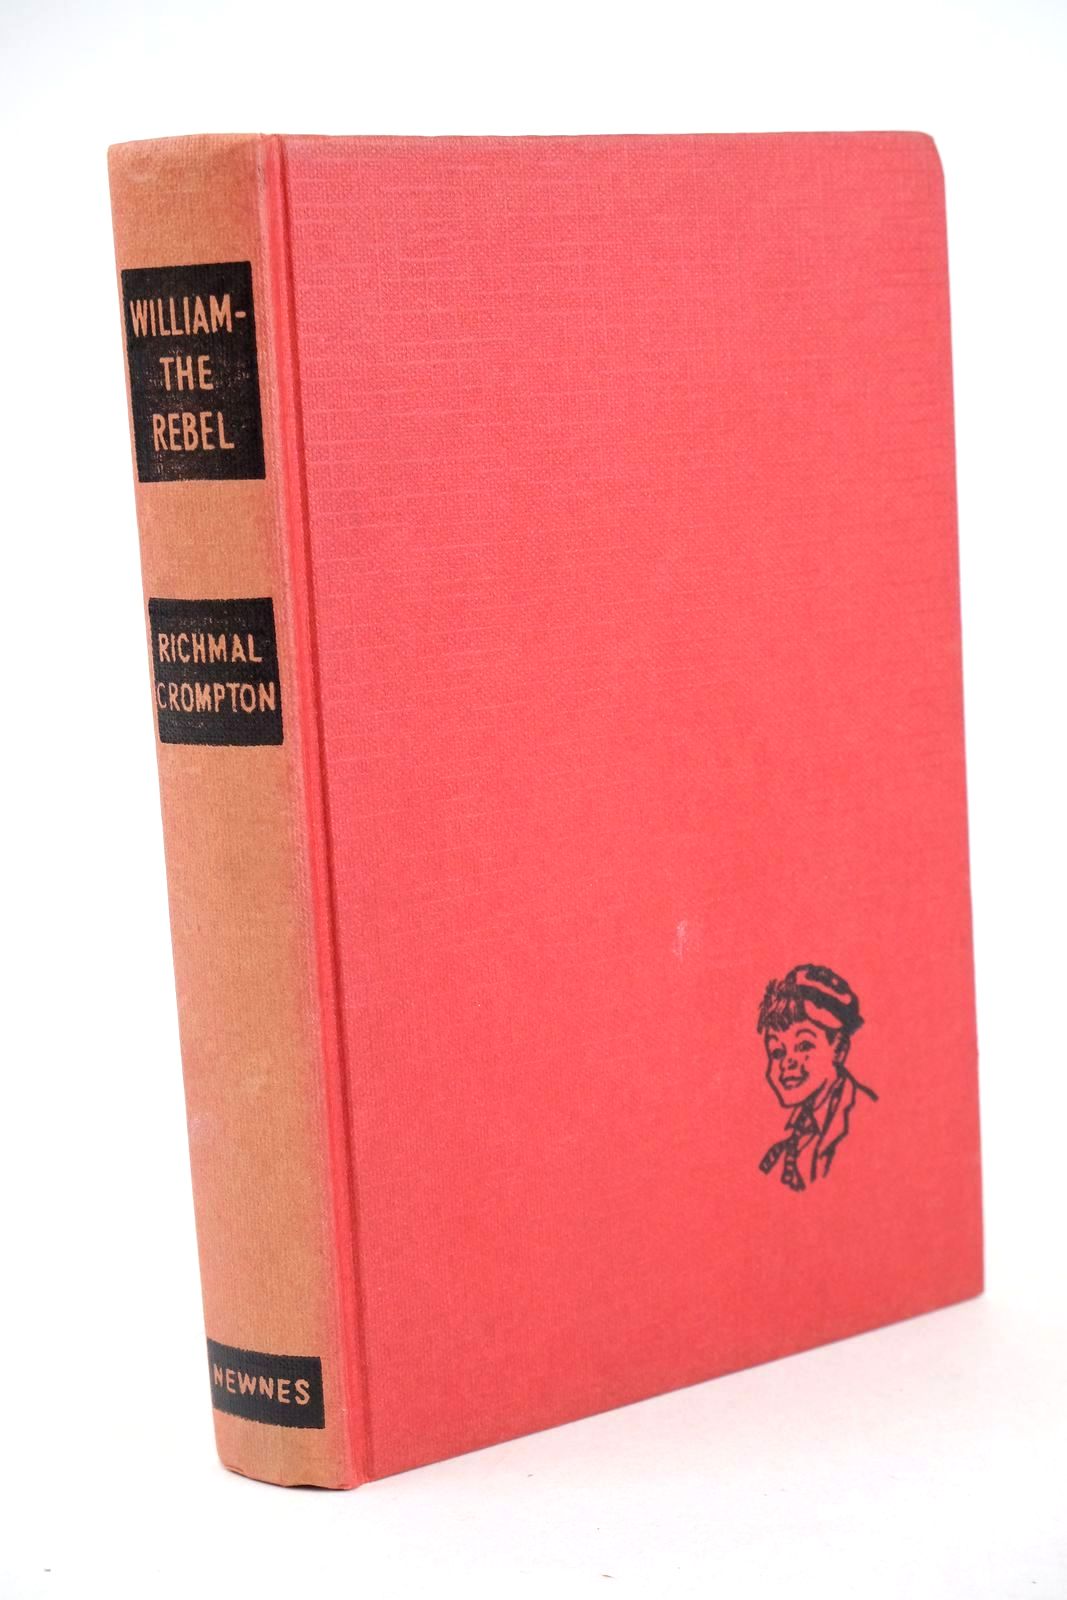 Photo of WILLIAM THE REBEL written by Crompton, Richmal illustrated by Henry, Thomas published by George Newnes Limited (STOCK CODE: 1326055)  for sale by Stella & Rose's Books